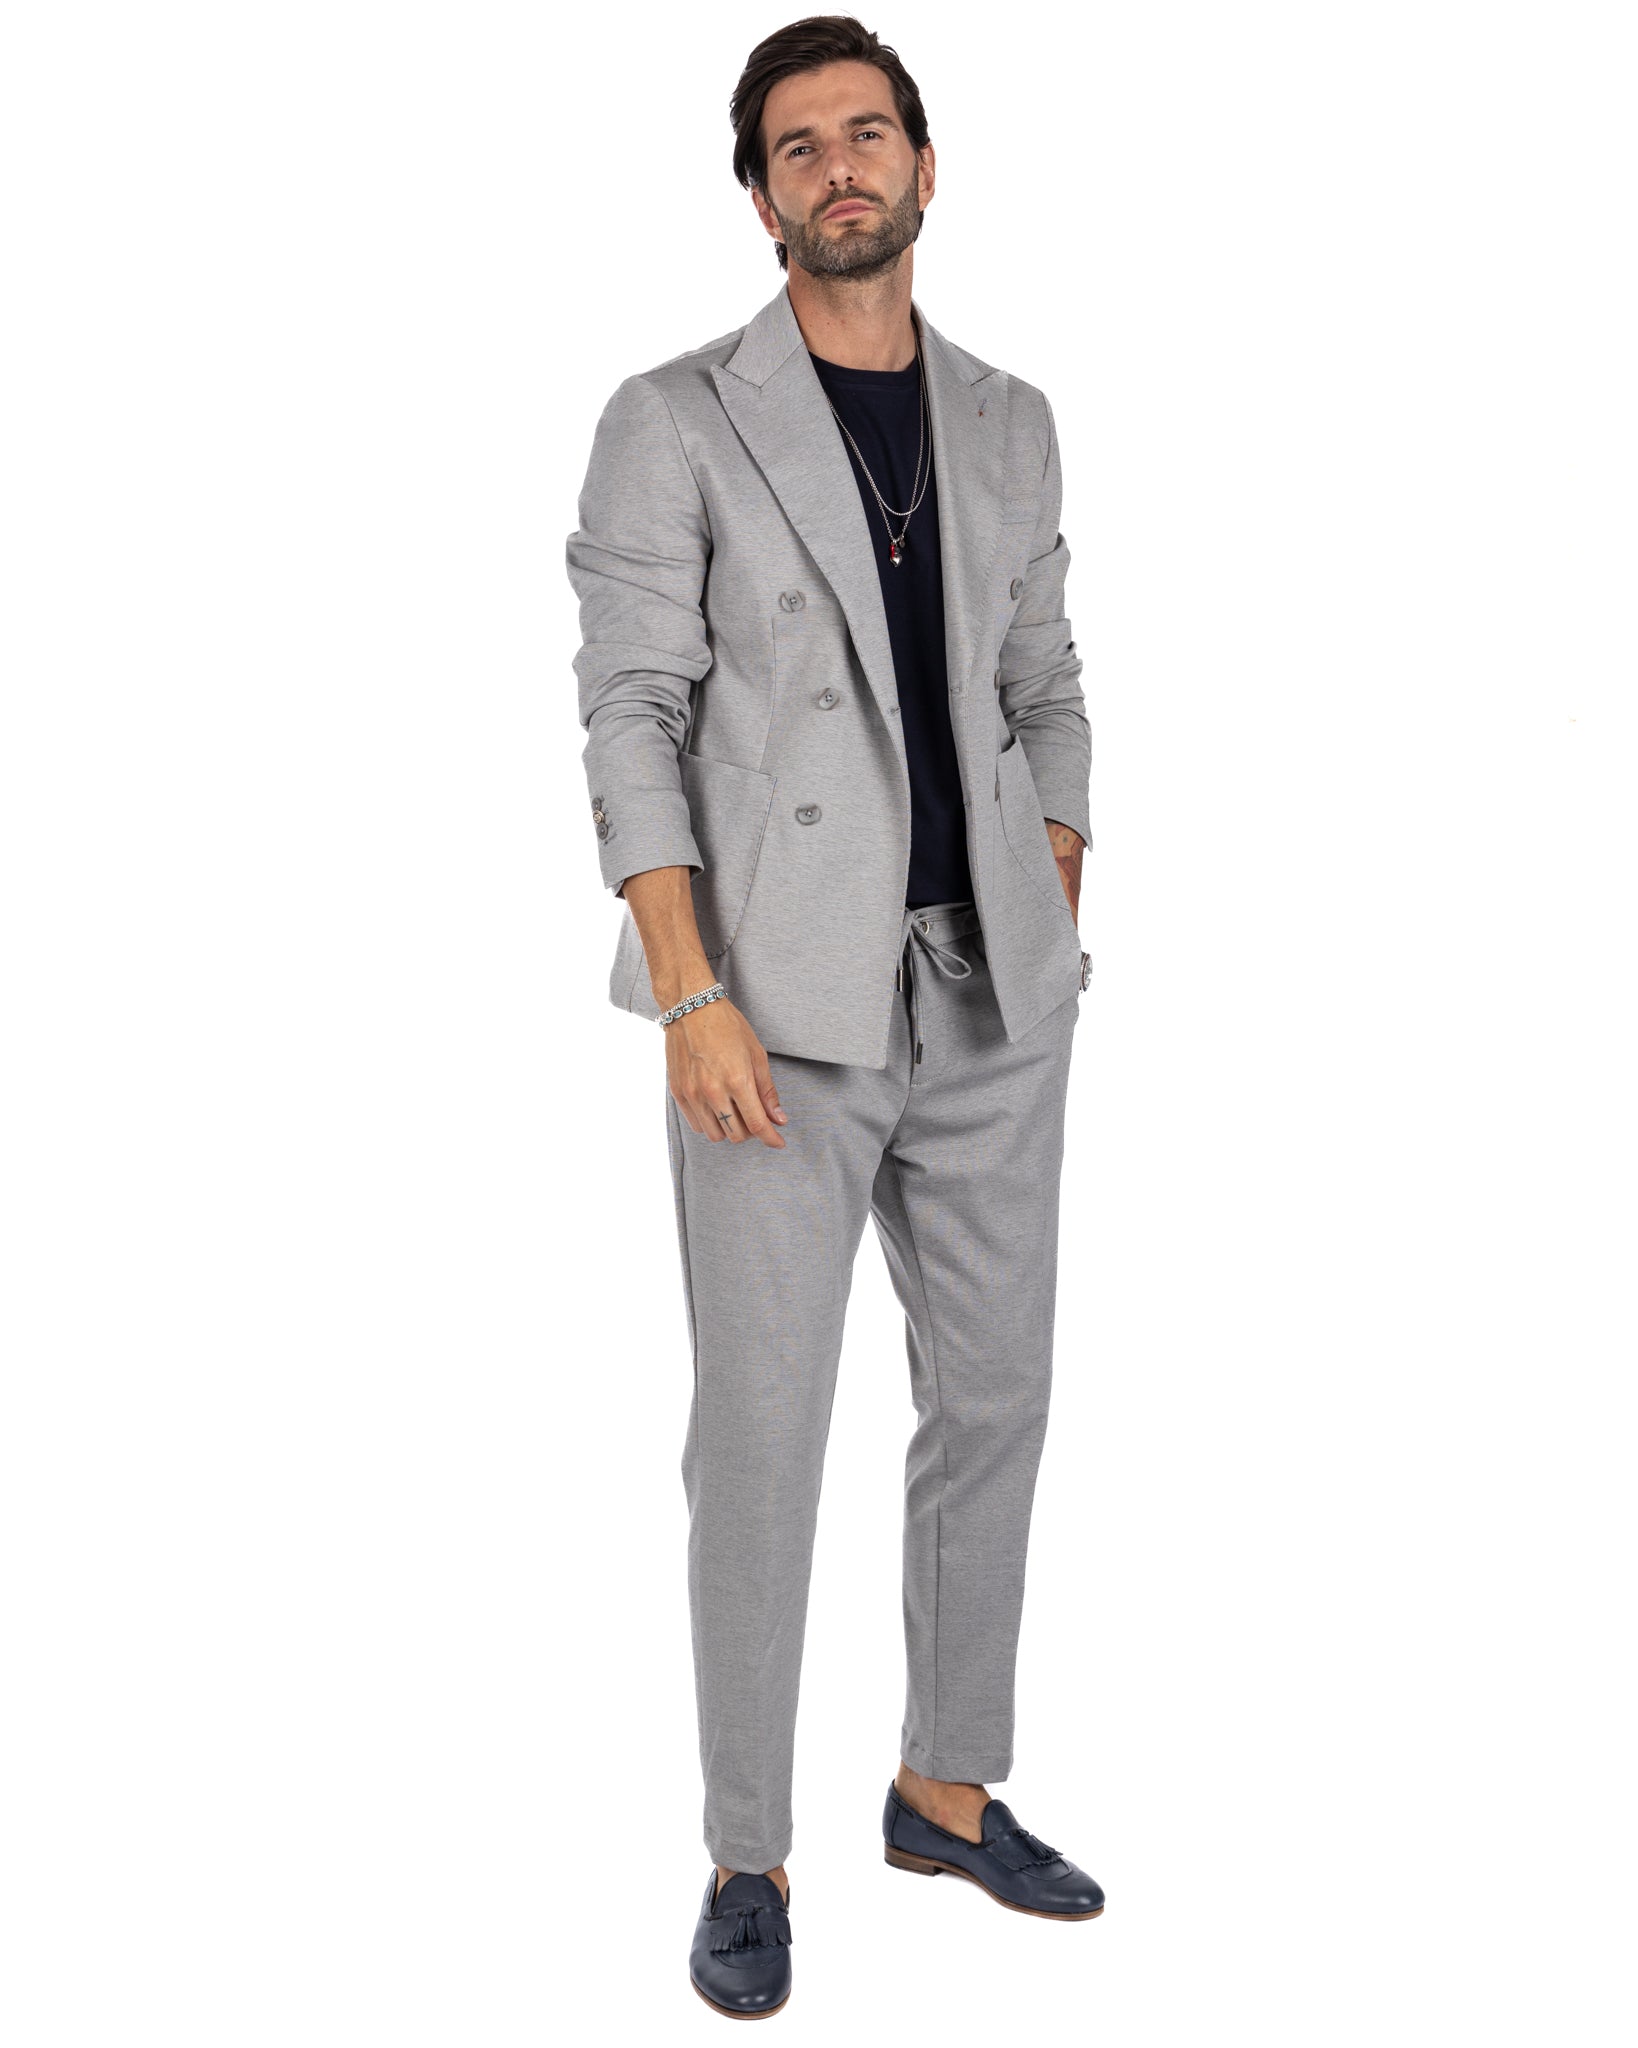 Shelby - gray suit